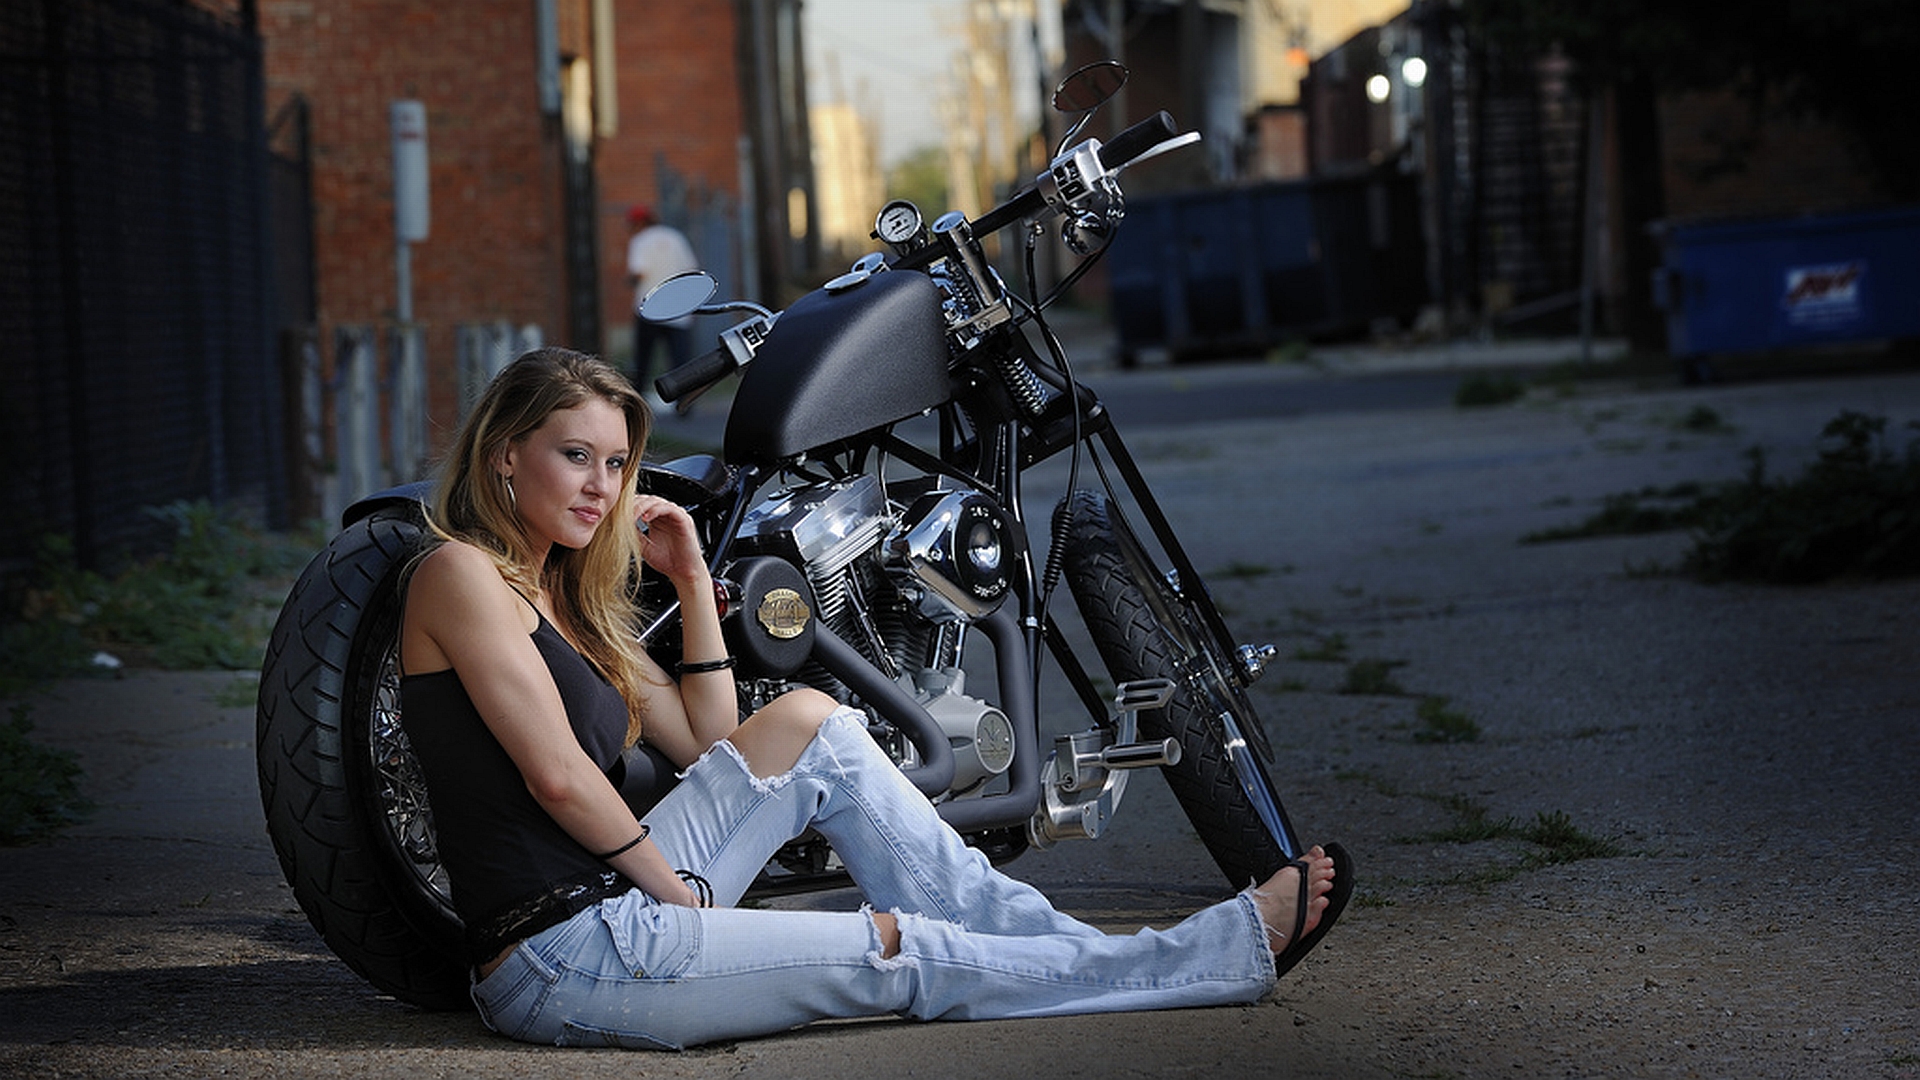 Girls On Motorcycles Pics And Comments Page 743 Triumph Forum 